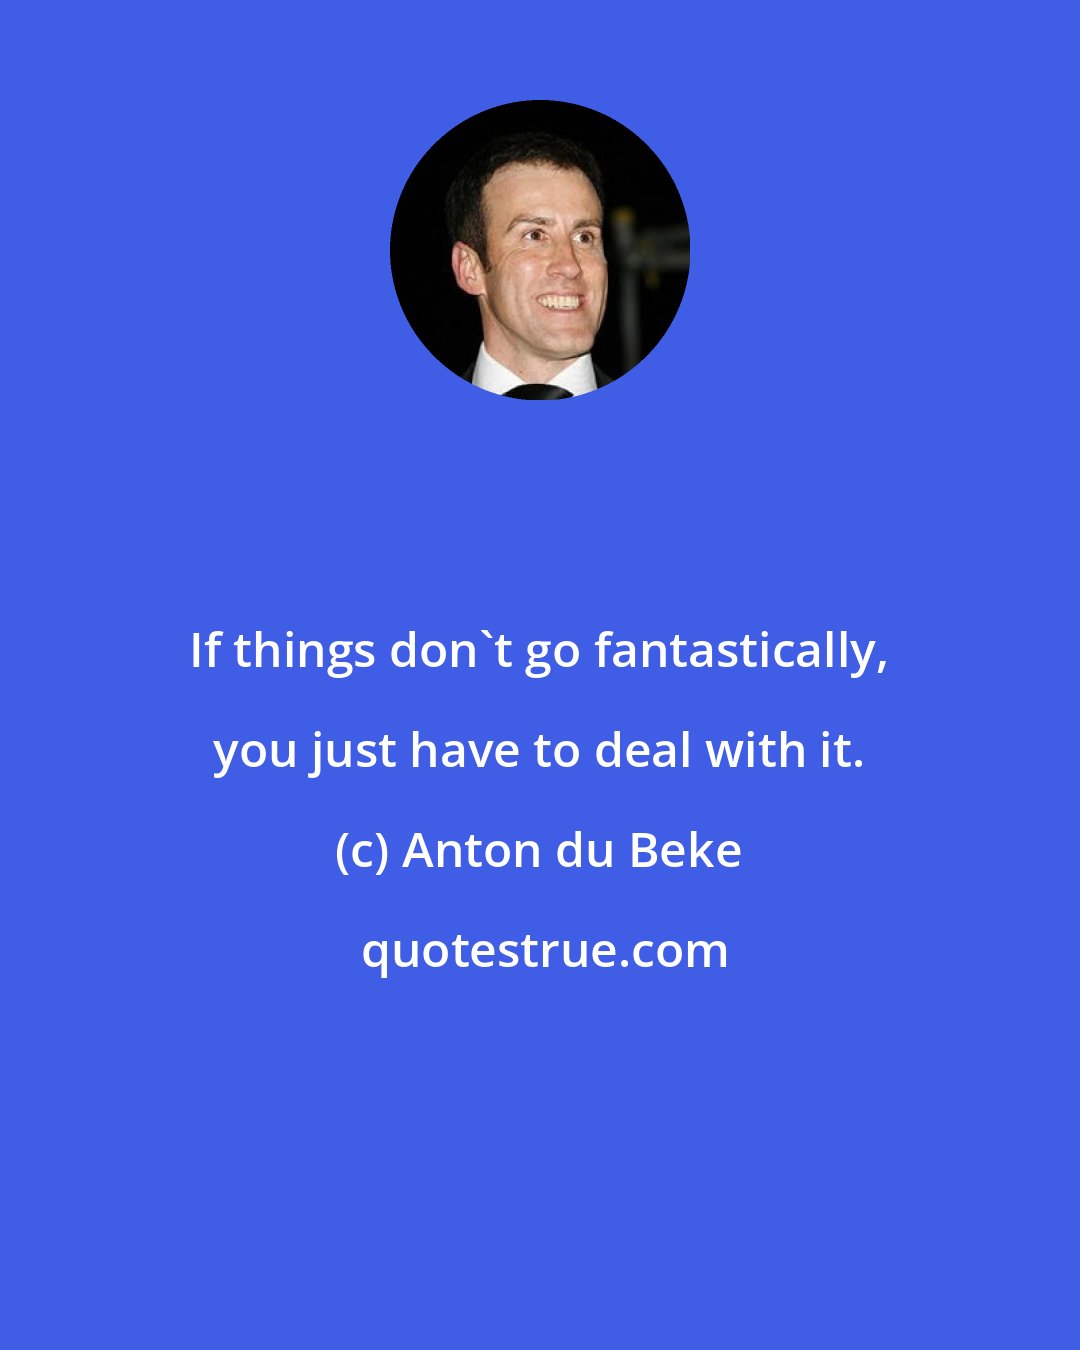 Anton du Beke: If things don't go fantastically, you just have to deal with it.